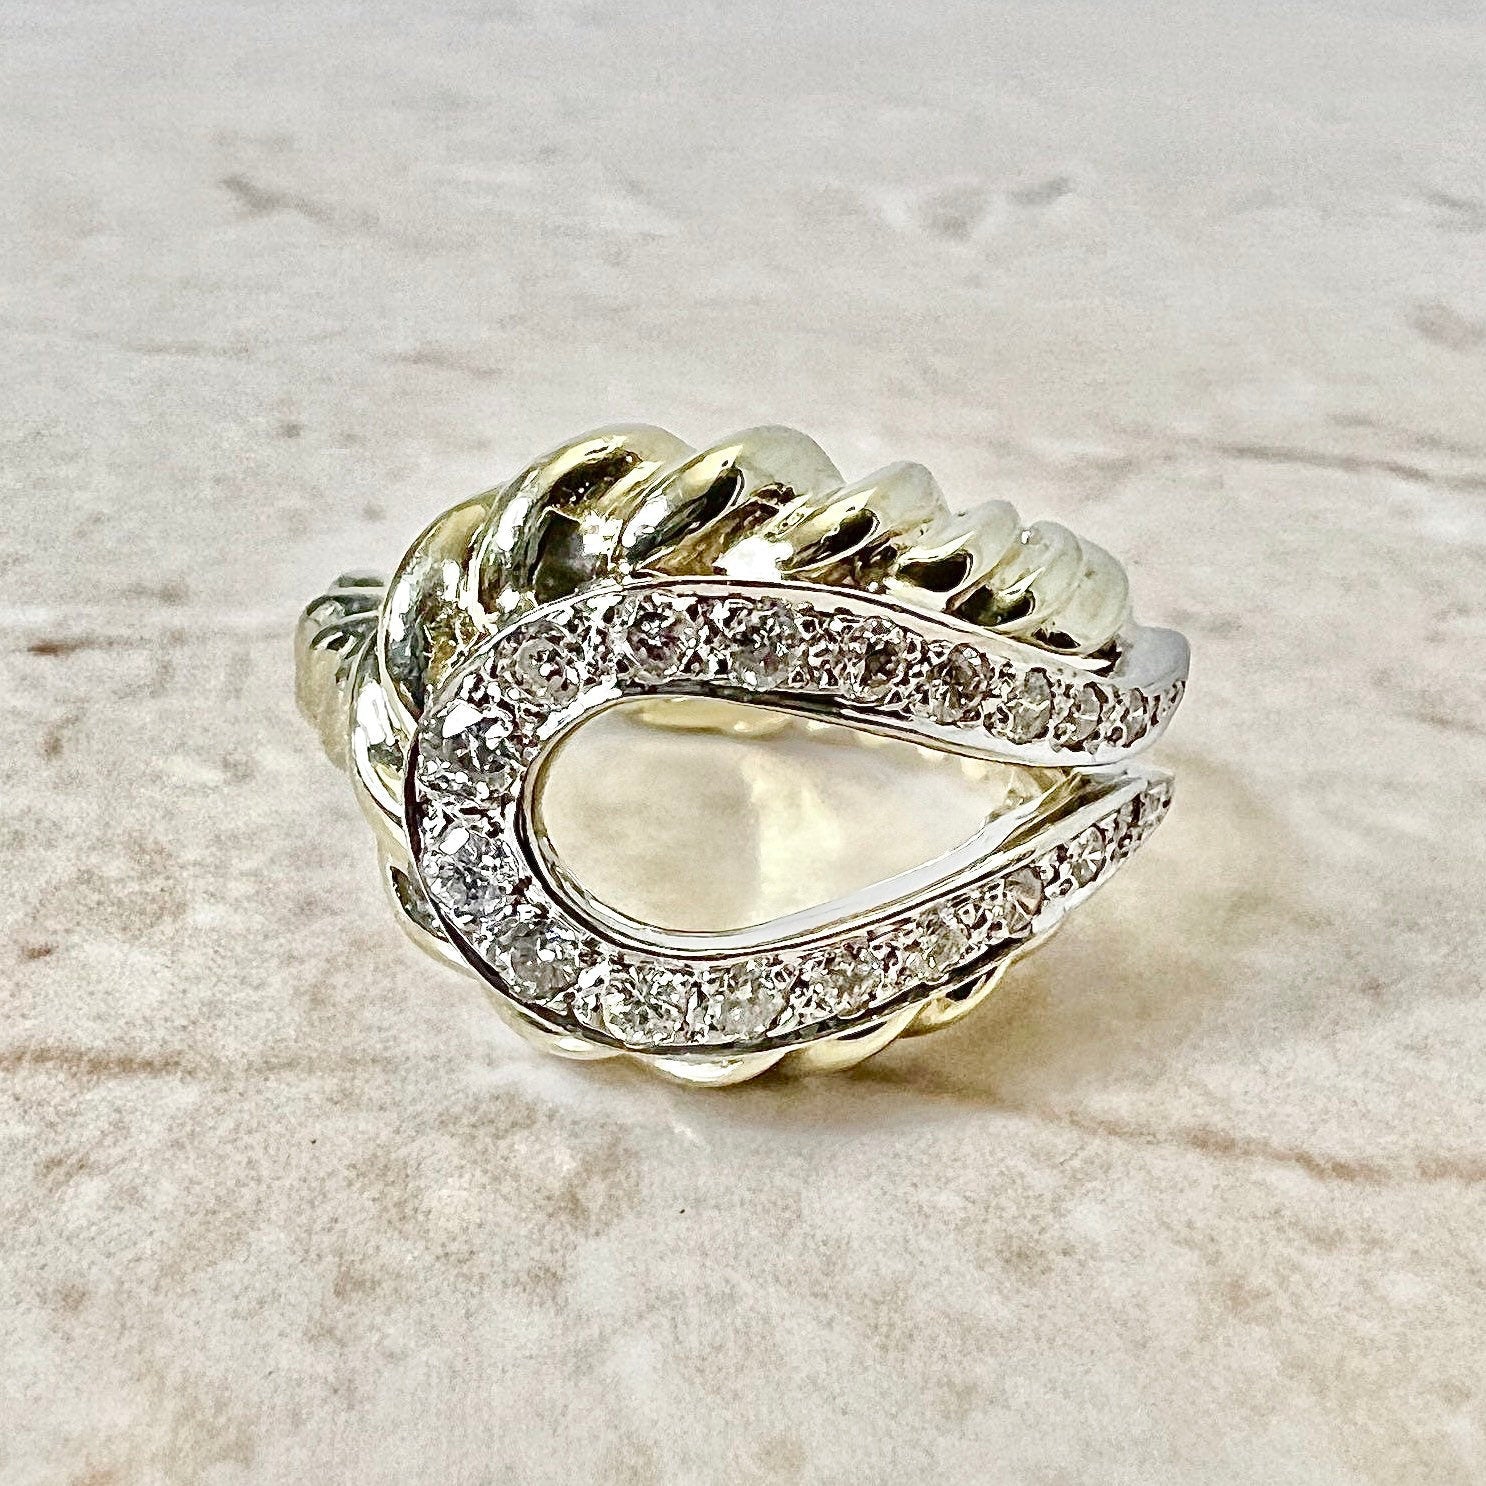 Fine Vintage 14K Rope Diamond Ring - Two Tone Gold Diamond Cocktail Ring - Anniversary Ring - Birthday Gift - Holiday Gift